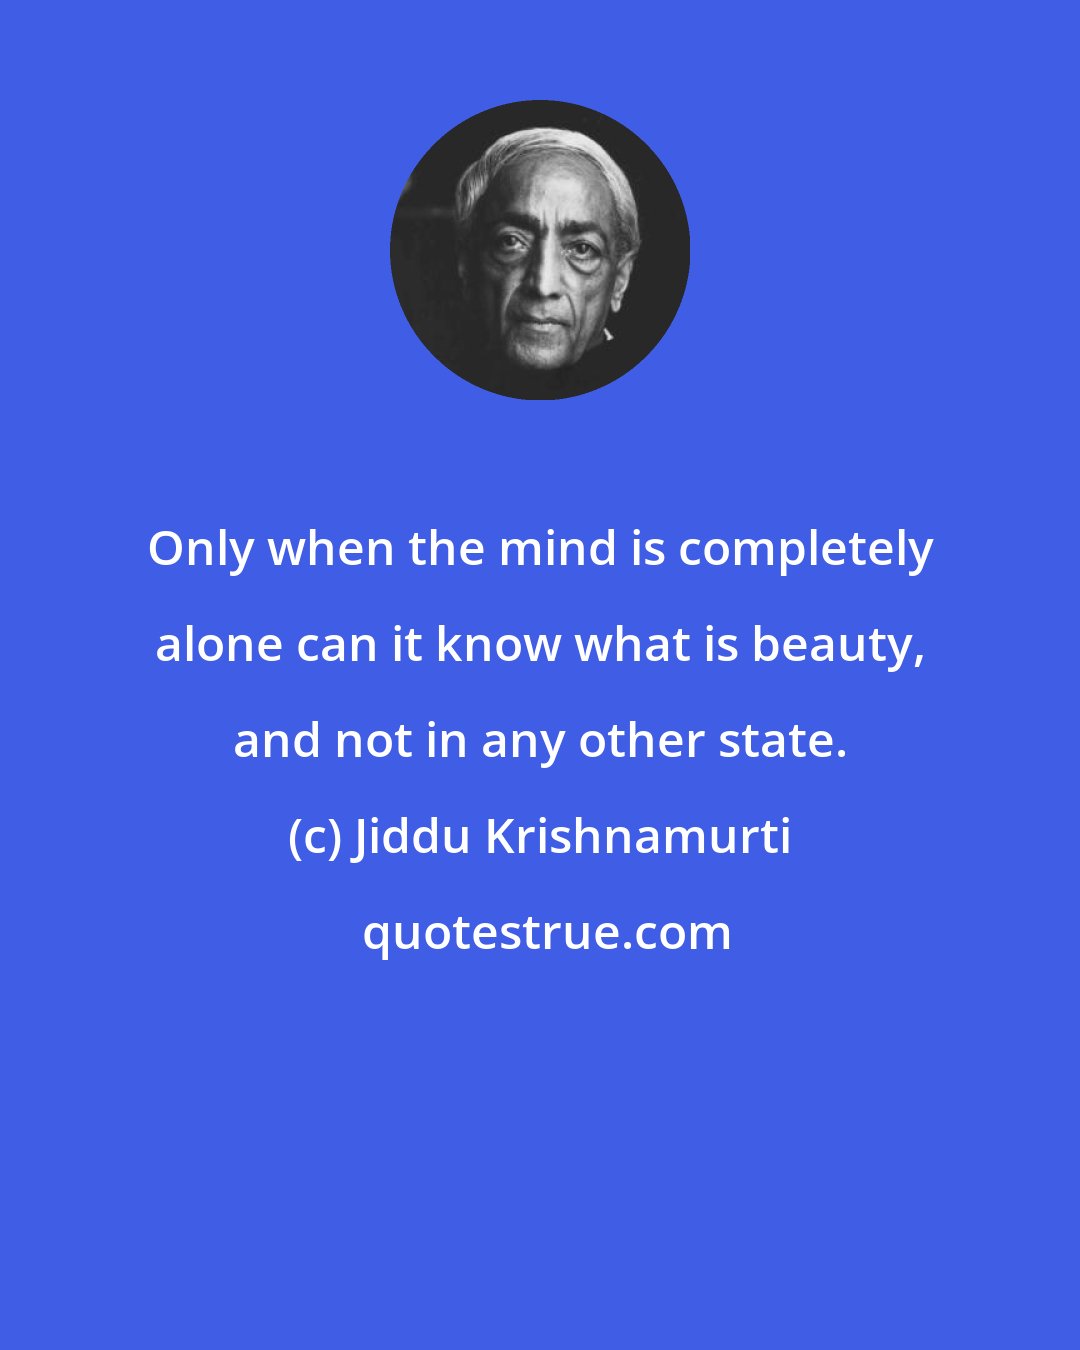 Jiddu Krishnamurti: Only when the mind is completely alone can it know what is beauty, and not in any other state.